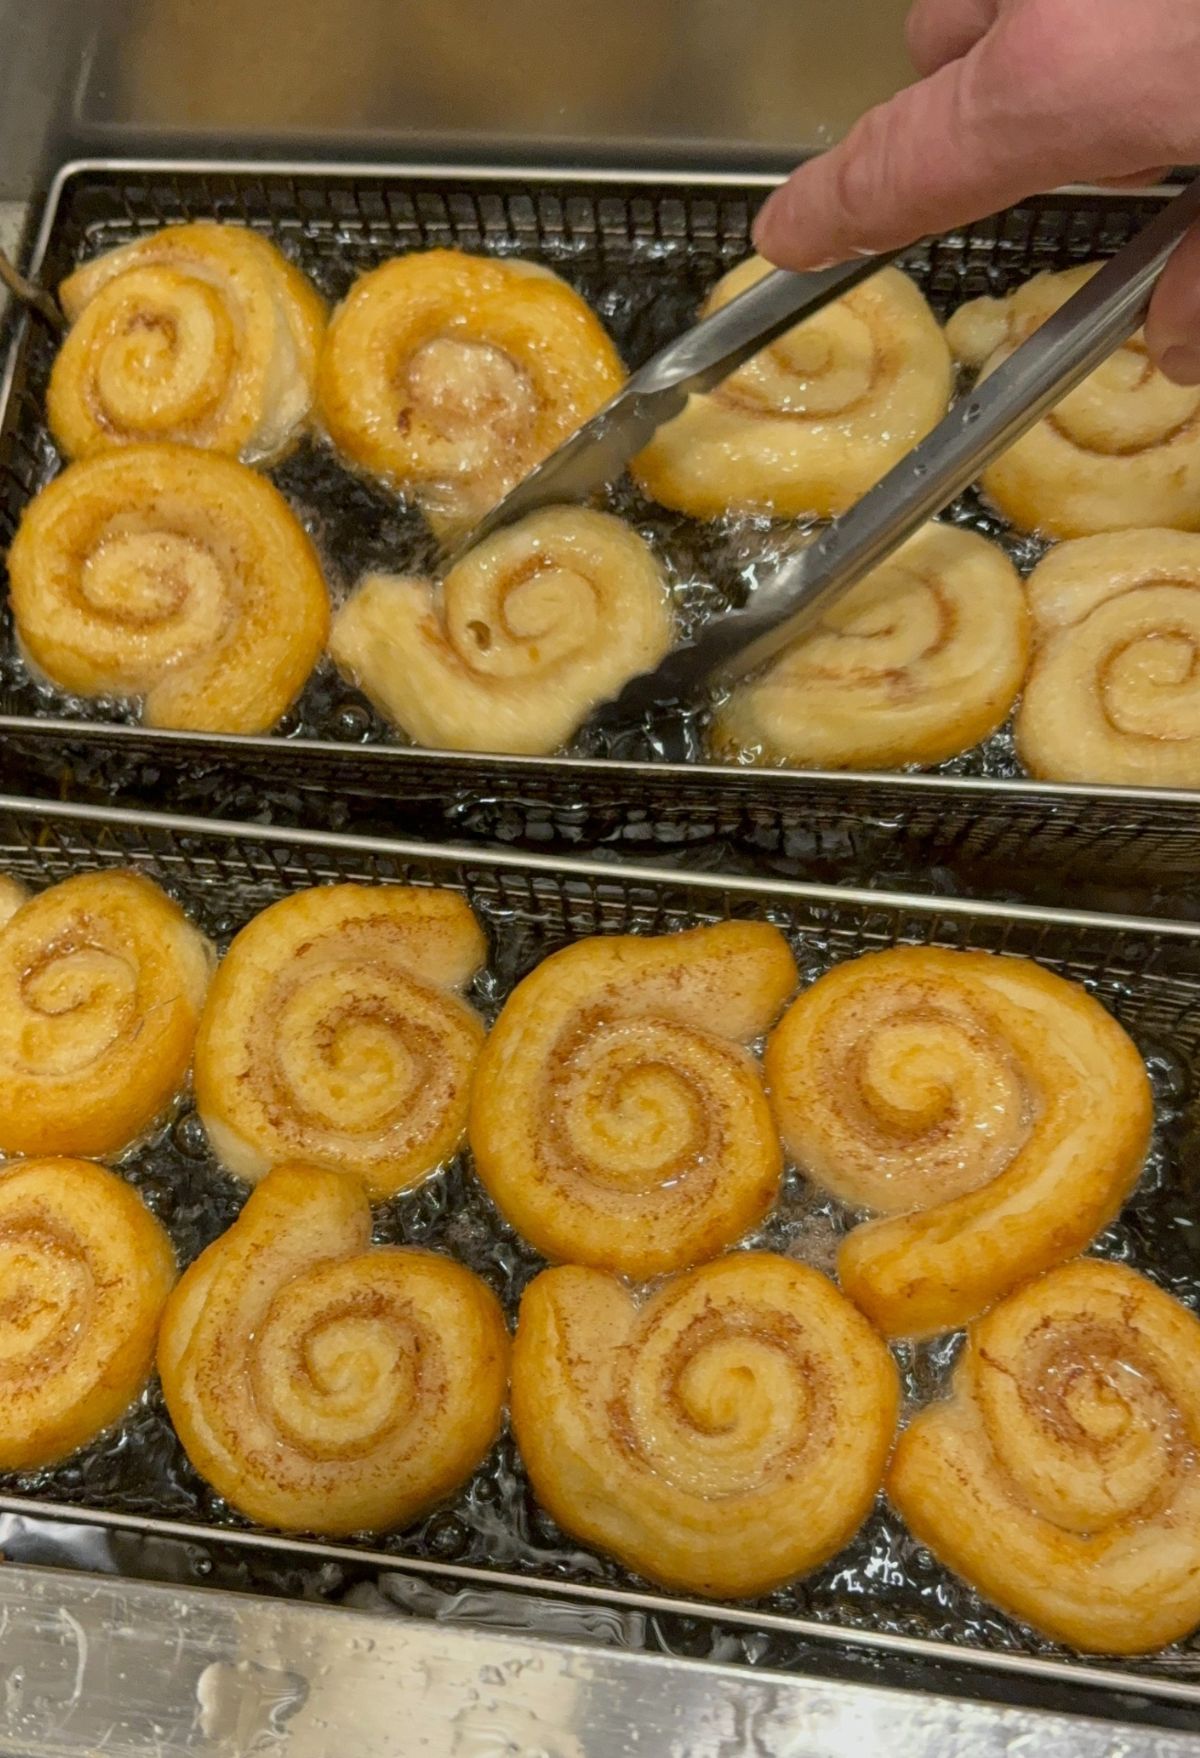 Frying spiral-shaped dough in hot oil.